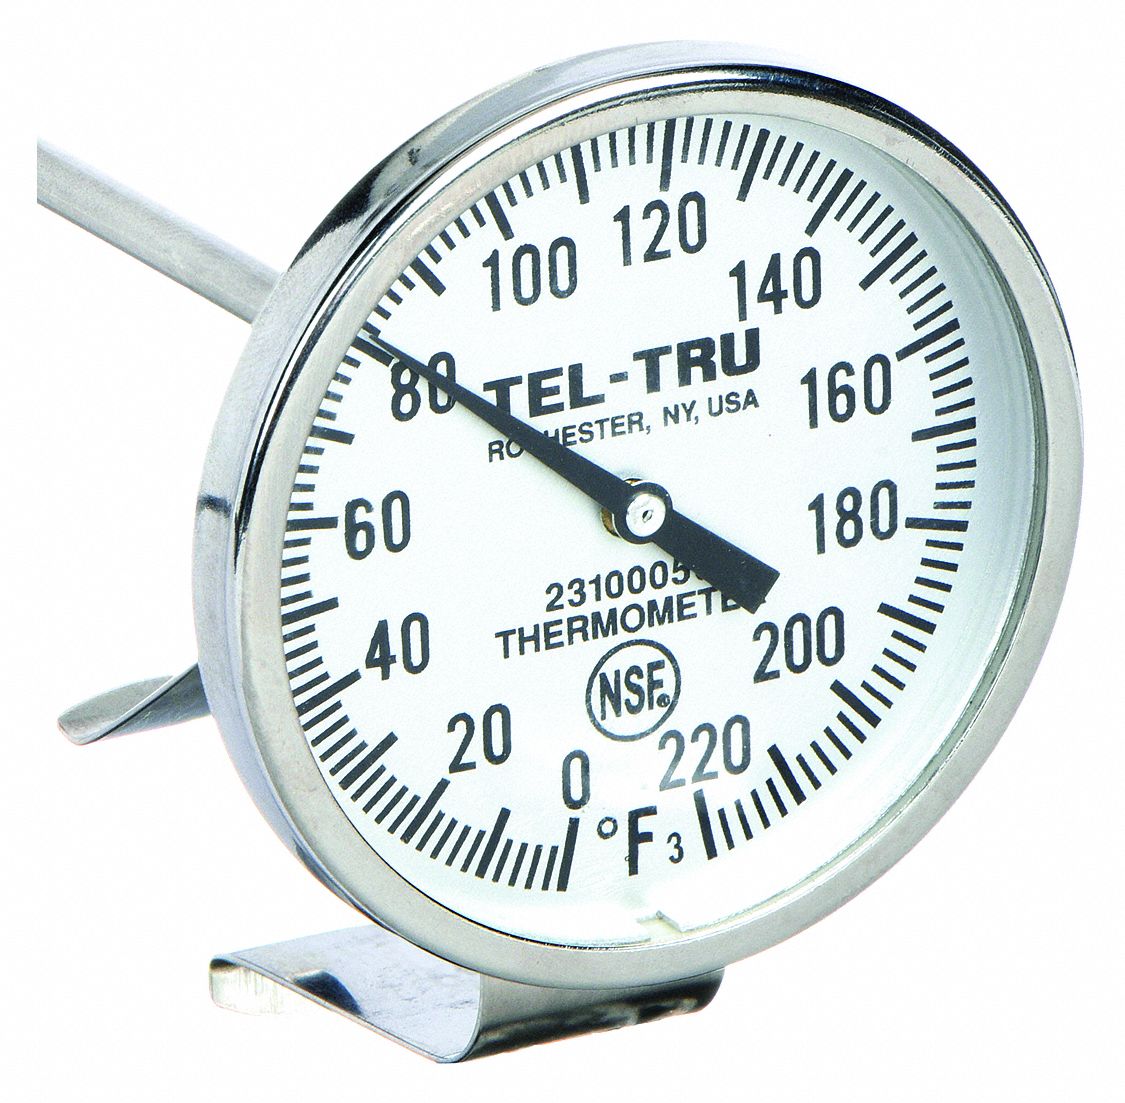 Tel-Tru LT225R Dial Thermometer Review